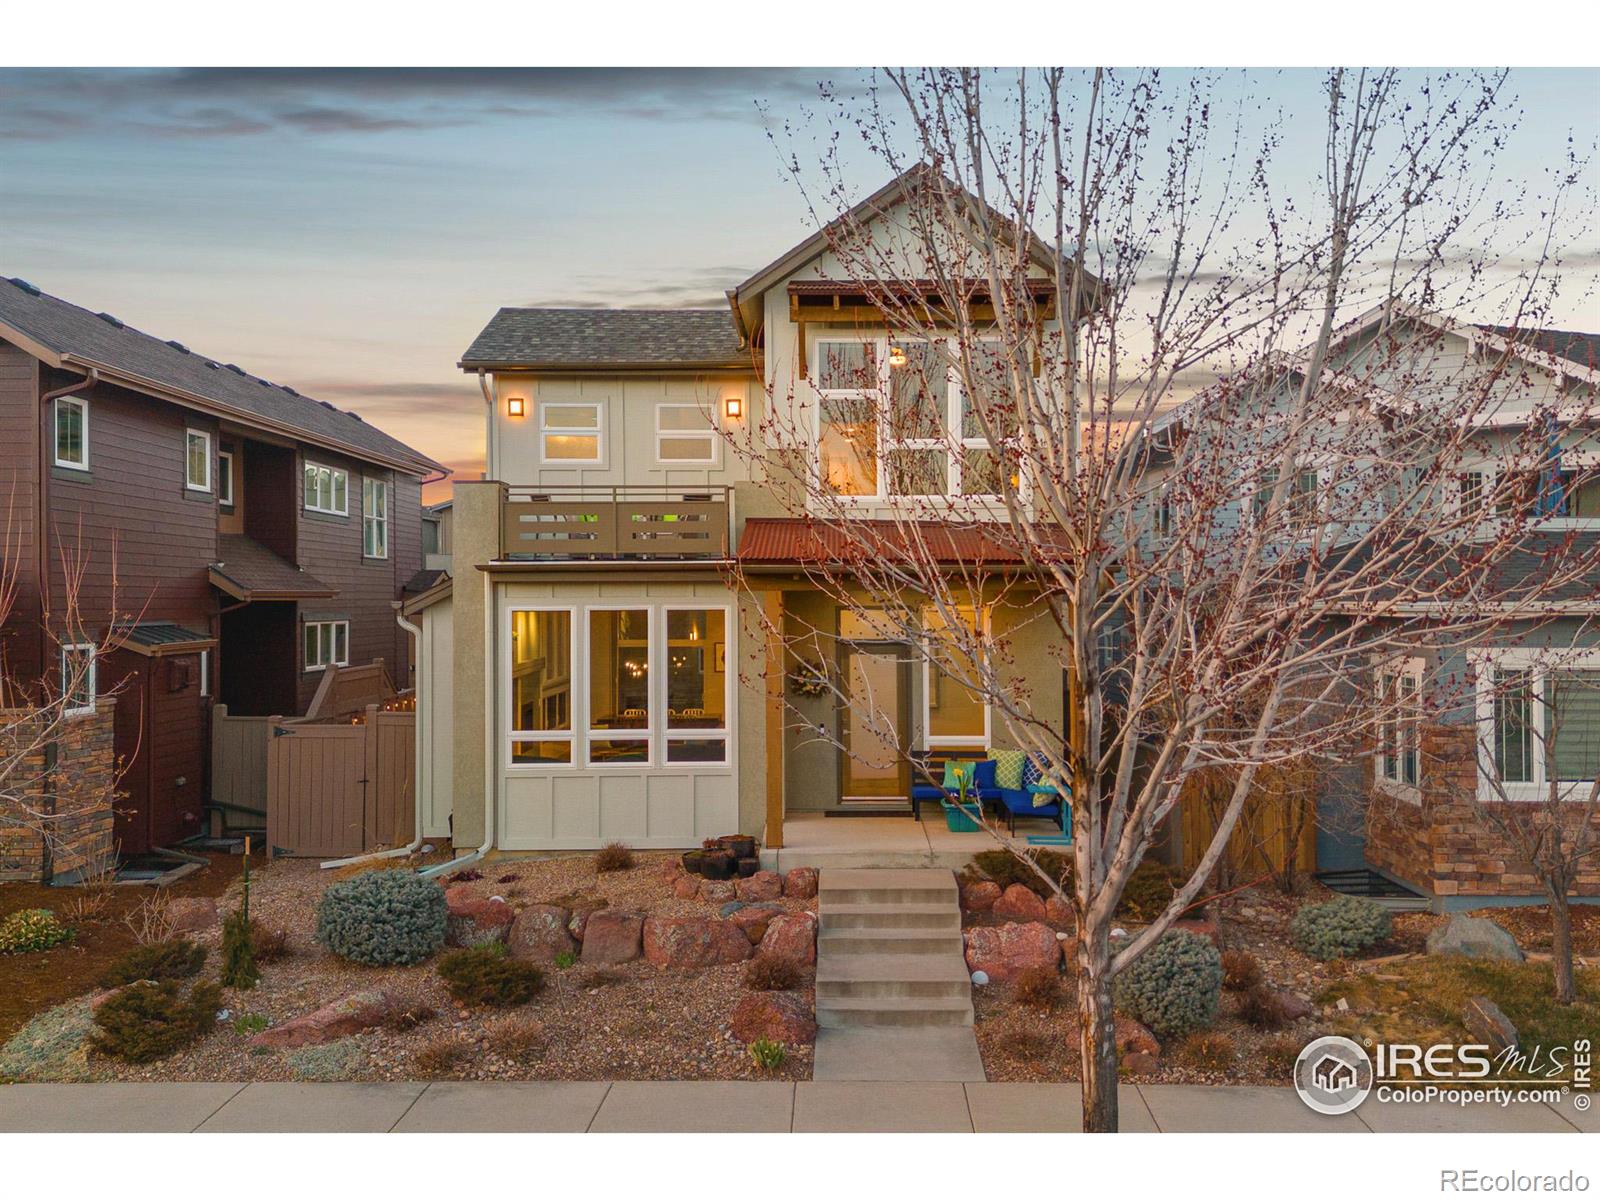 3215  Ouray Street, boulder MLS: 4567891004447 Beds: 4 Baths: 4 Price: $1,690,000